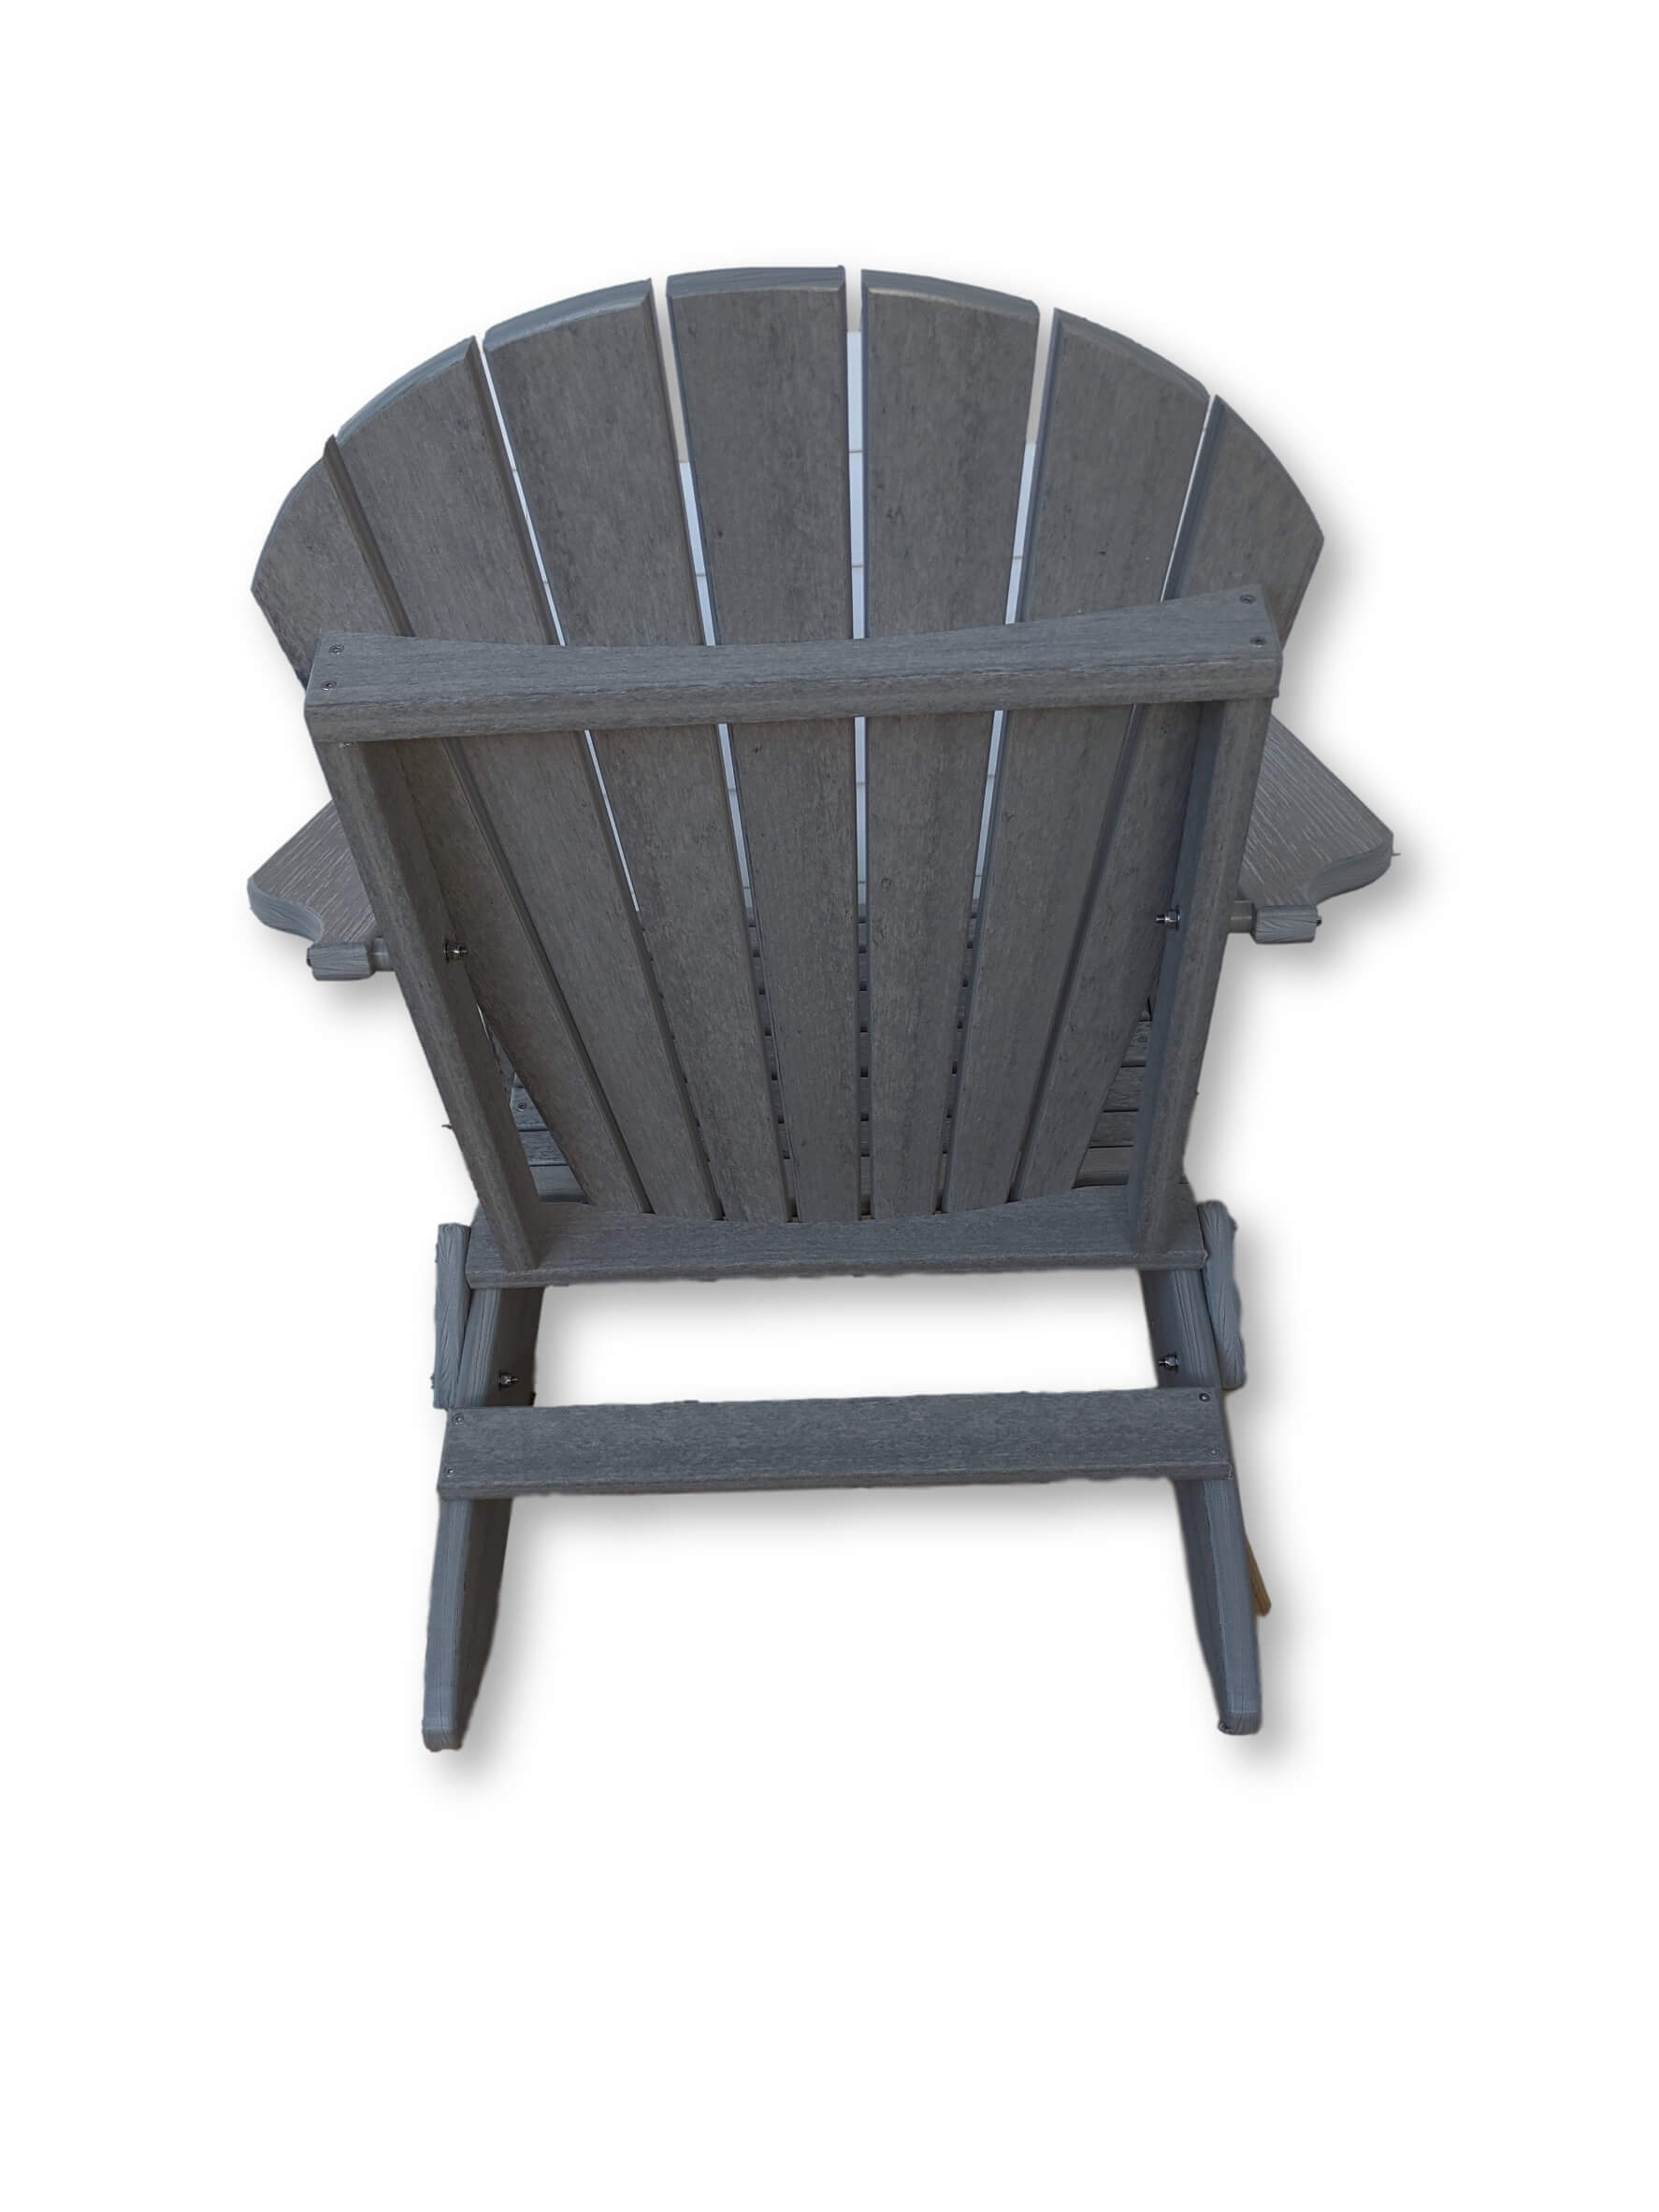 Dove Gray Folding Adirondack Chair No Cup Holders All Weather